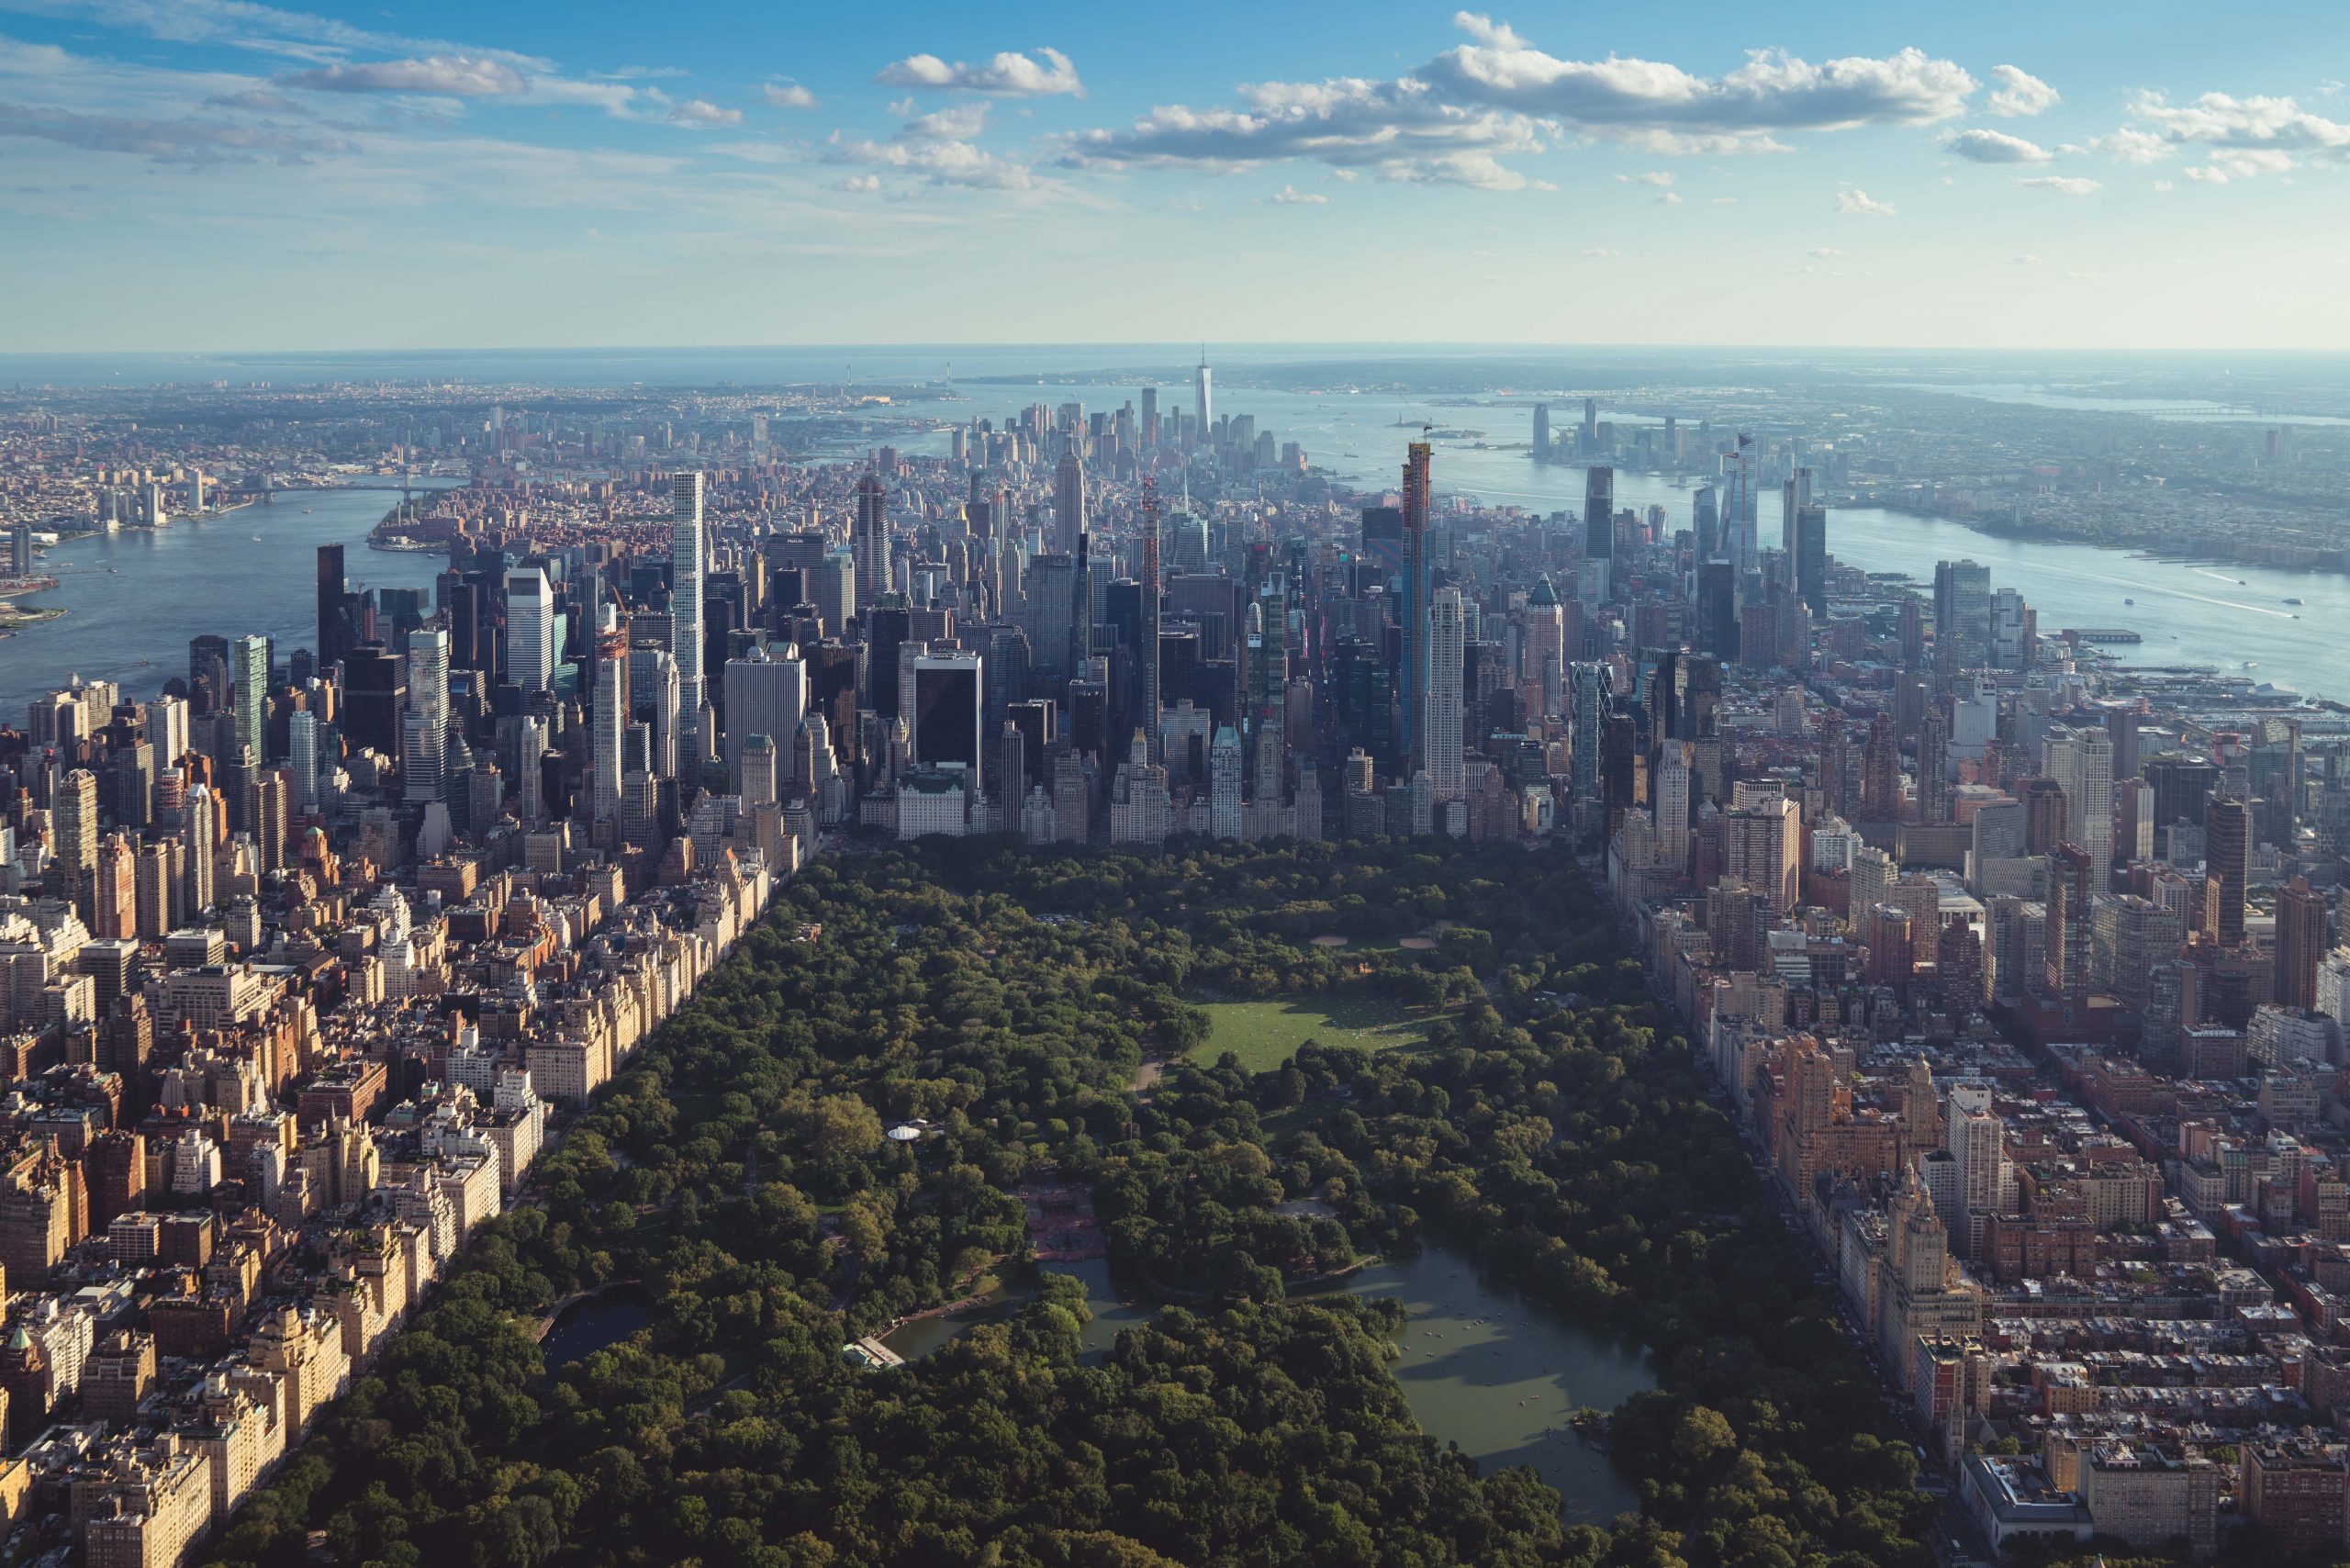 Central park as seen from above - stay here for quick access to leafy greens and boulevards